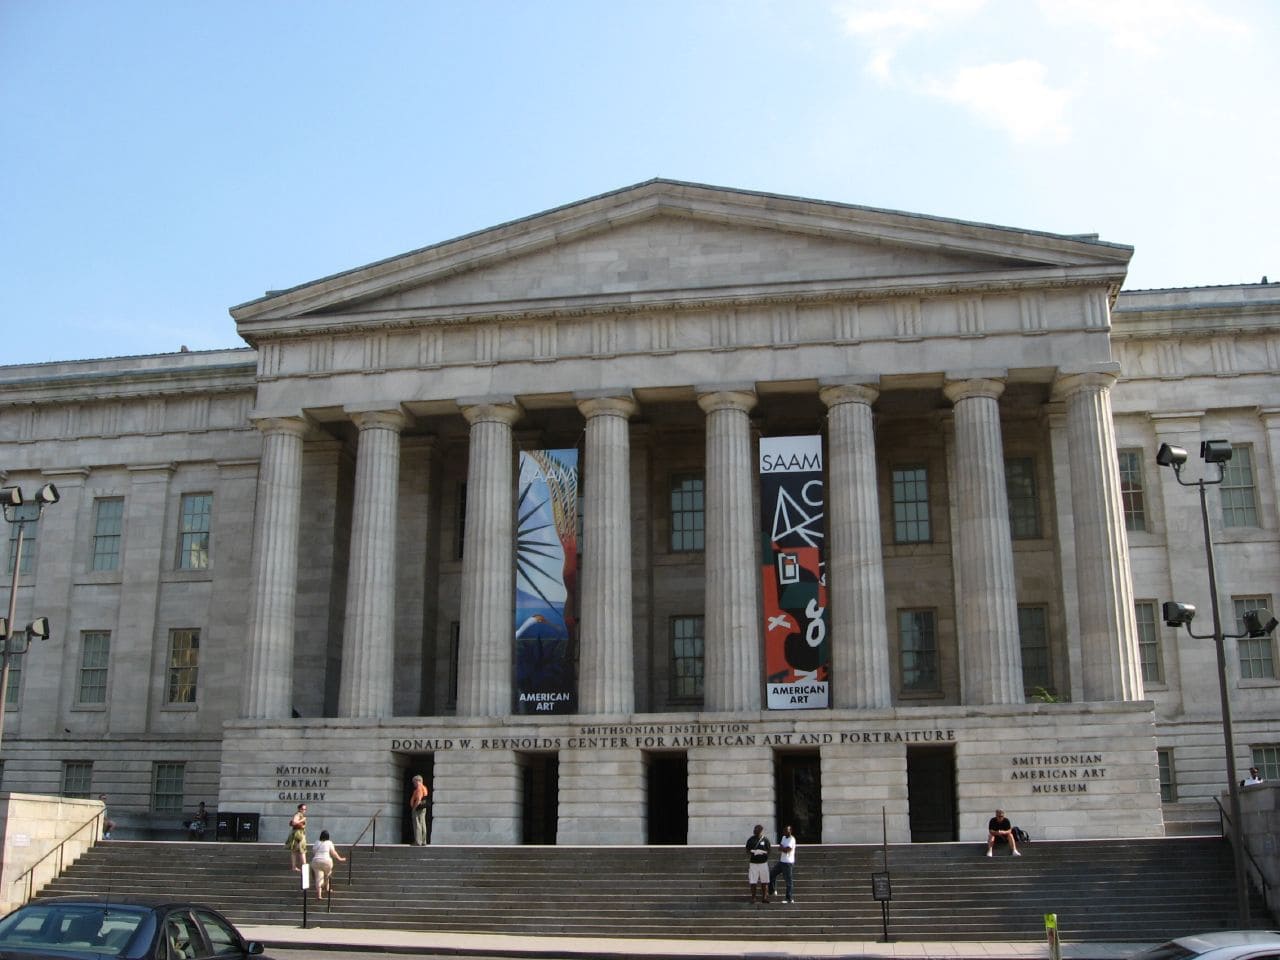 National Portrait Gallery in historic art museum located in Washington D.C